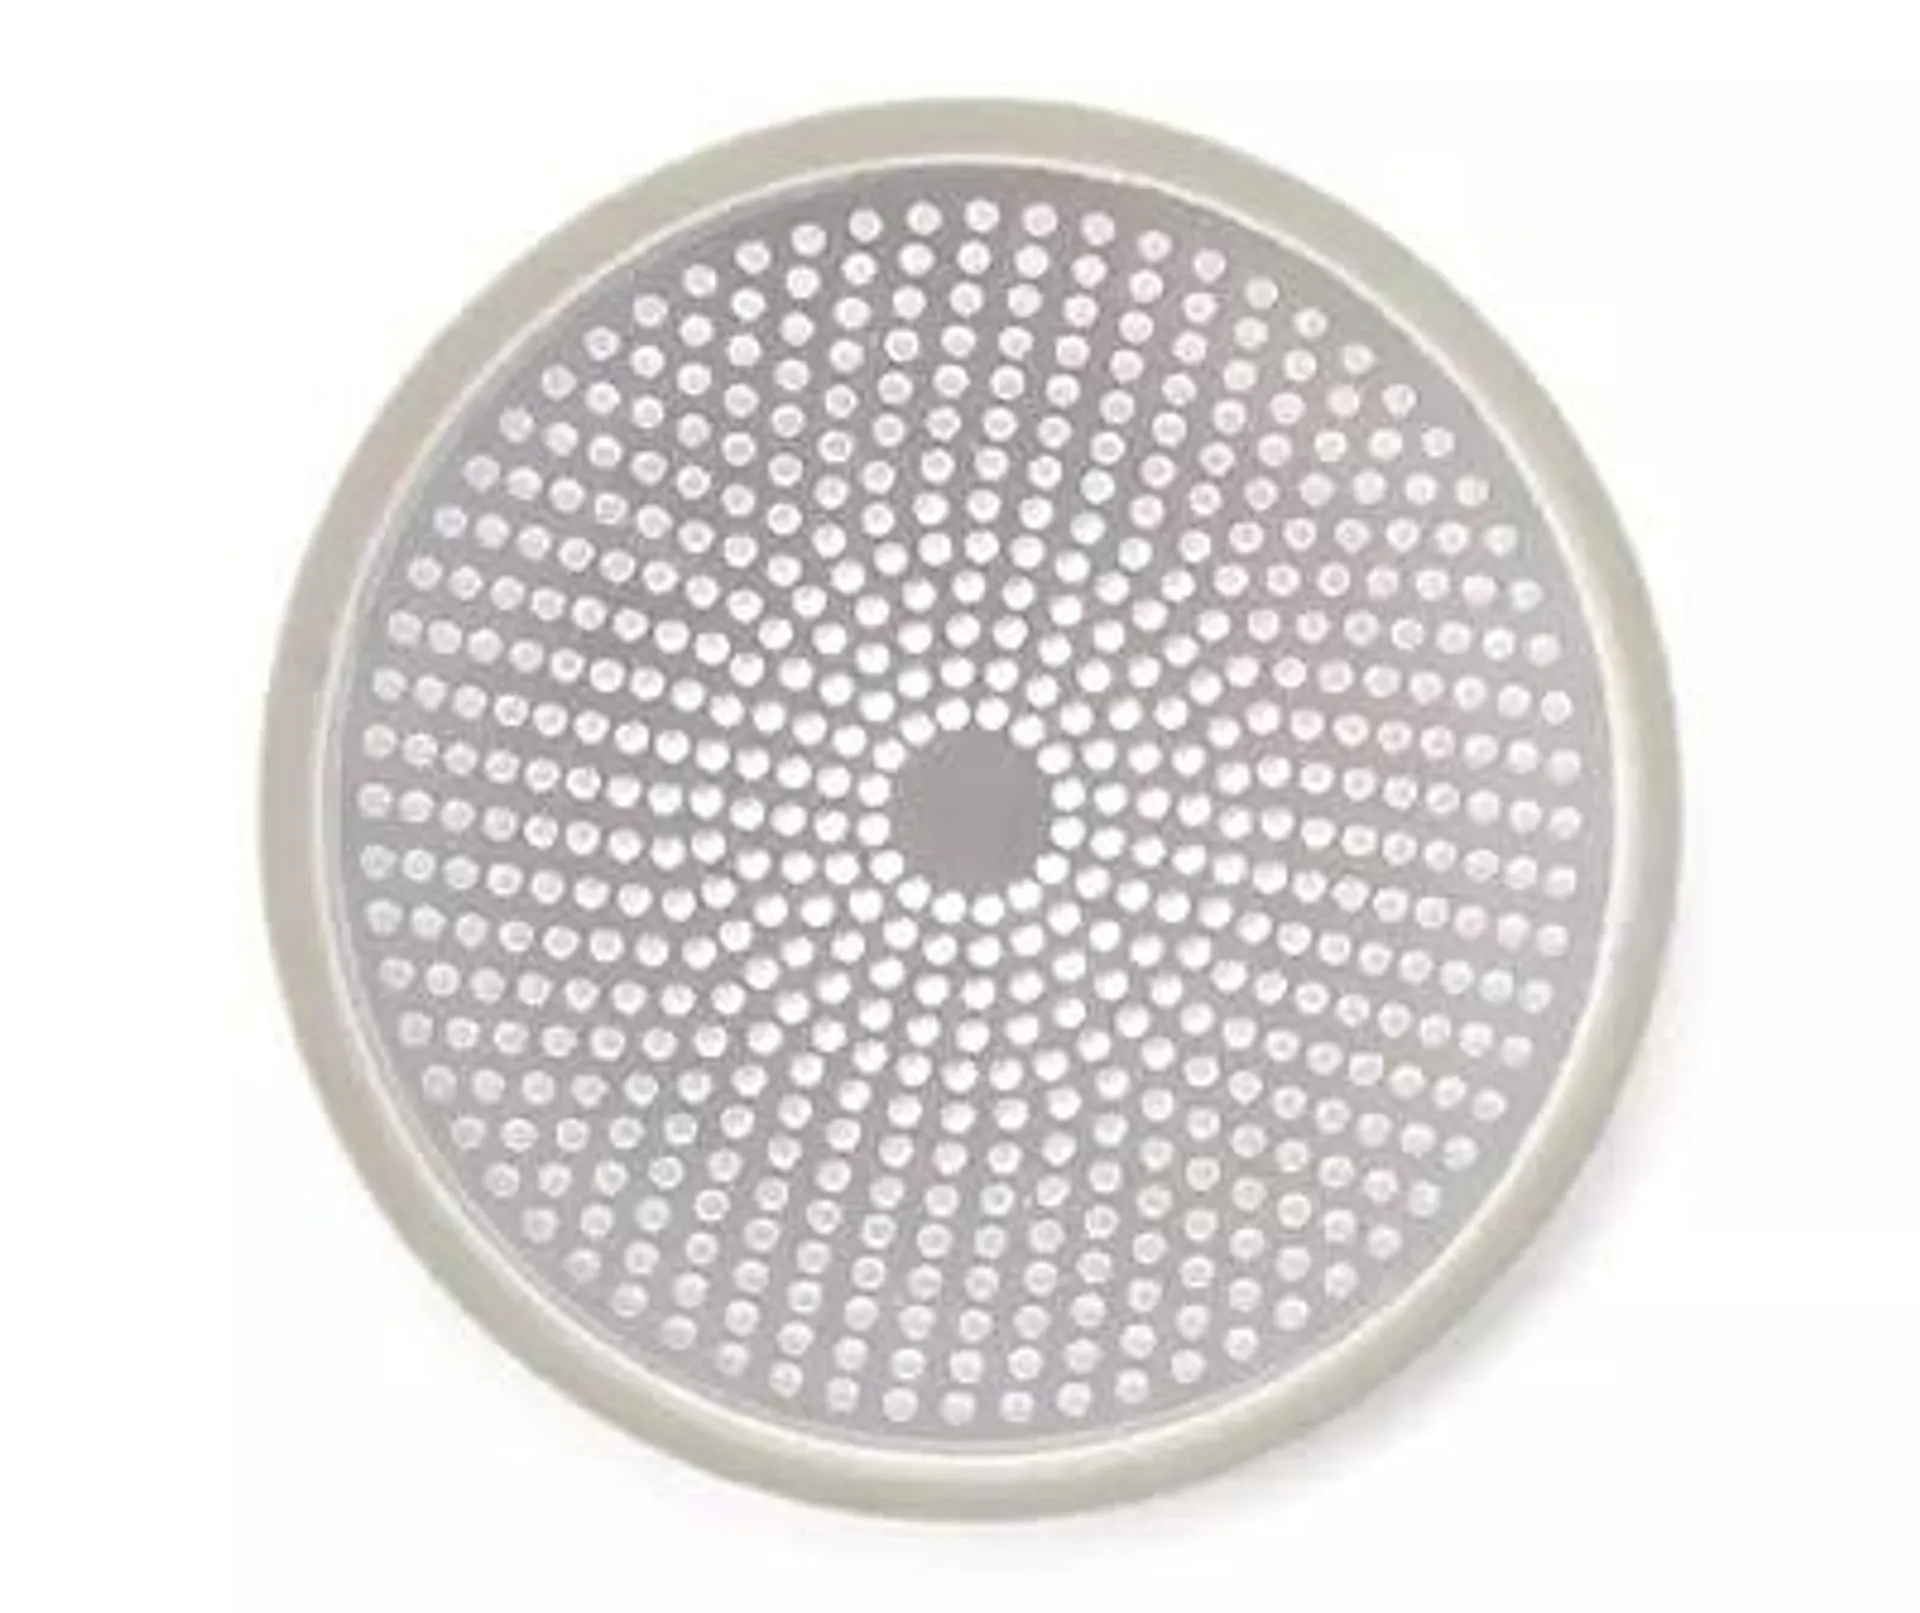 Rust-Proof Bathtub and Shower Drain Cover